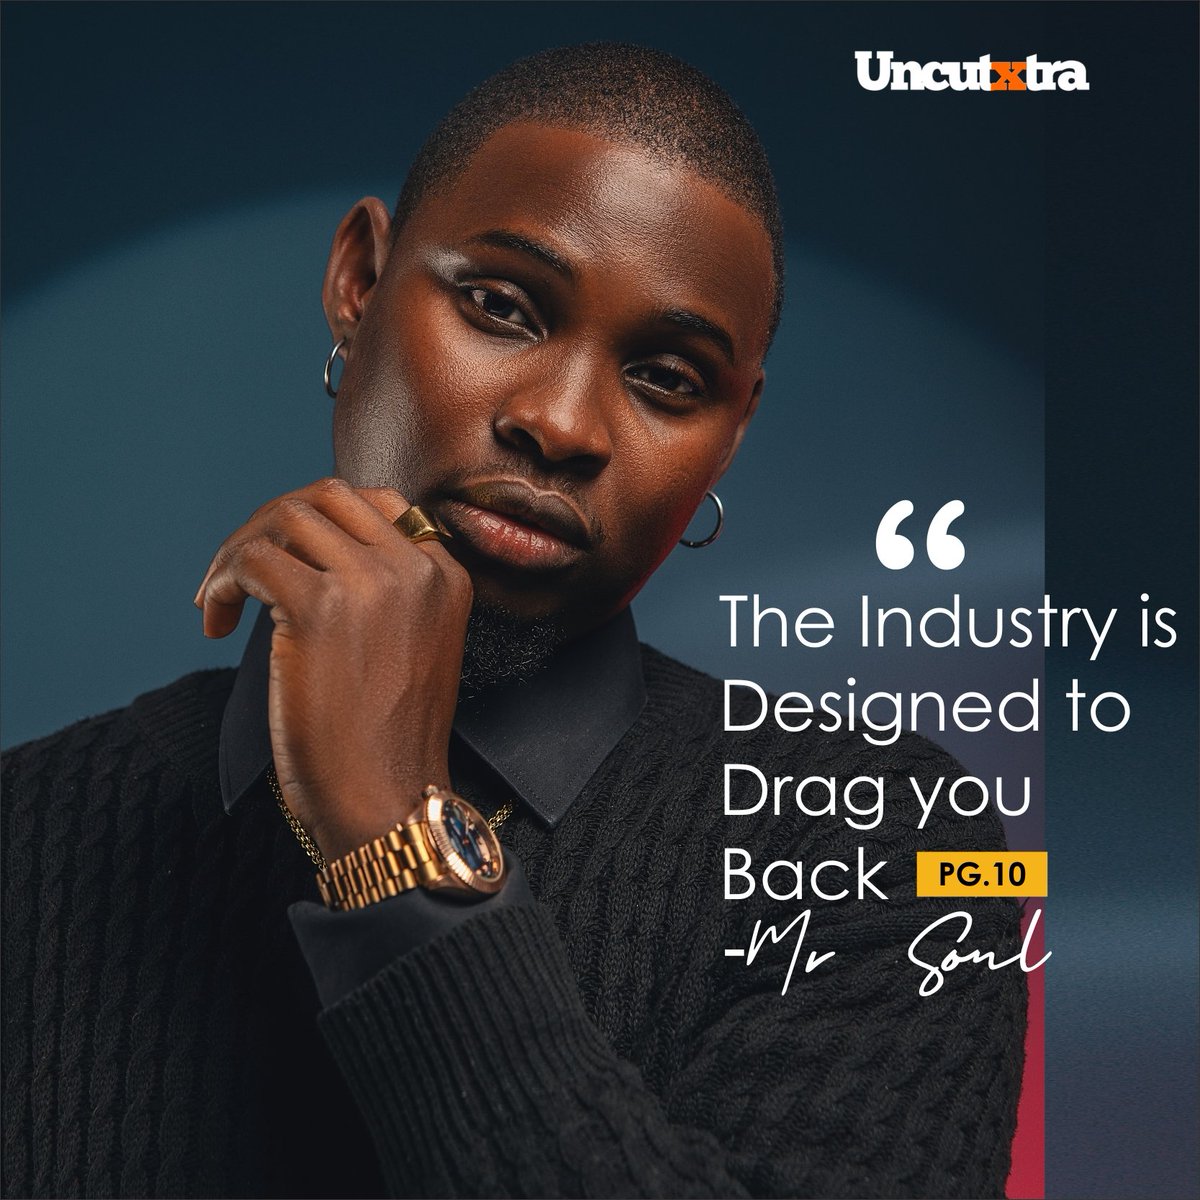 Everyone has their own take on things, and his words hit home. To uncover the insights behind this perspective, secure your copy of the UncutXtra magazine's 15th edition on our website or slide into our DMs to claim yours. Get ready for some real talk! #UncutXtraMagazine